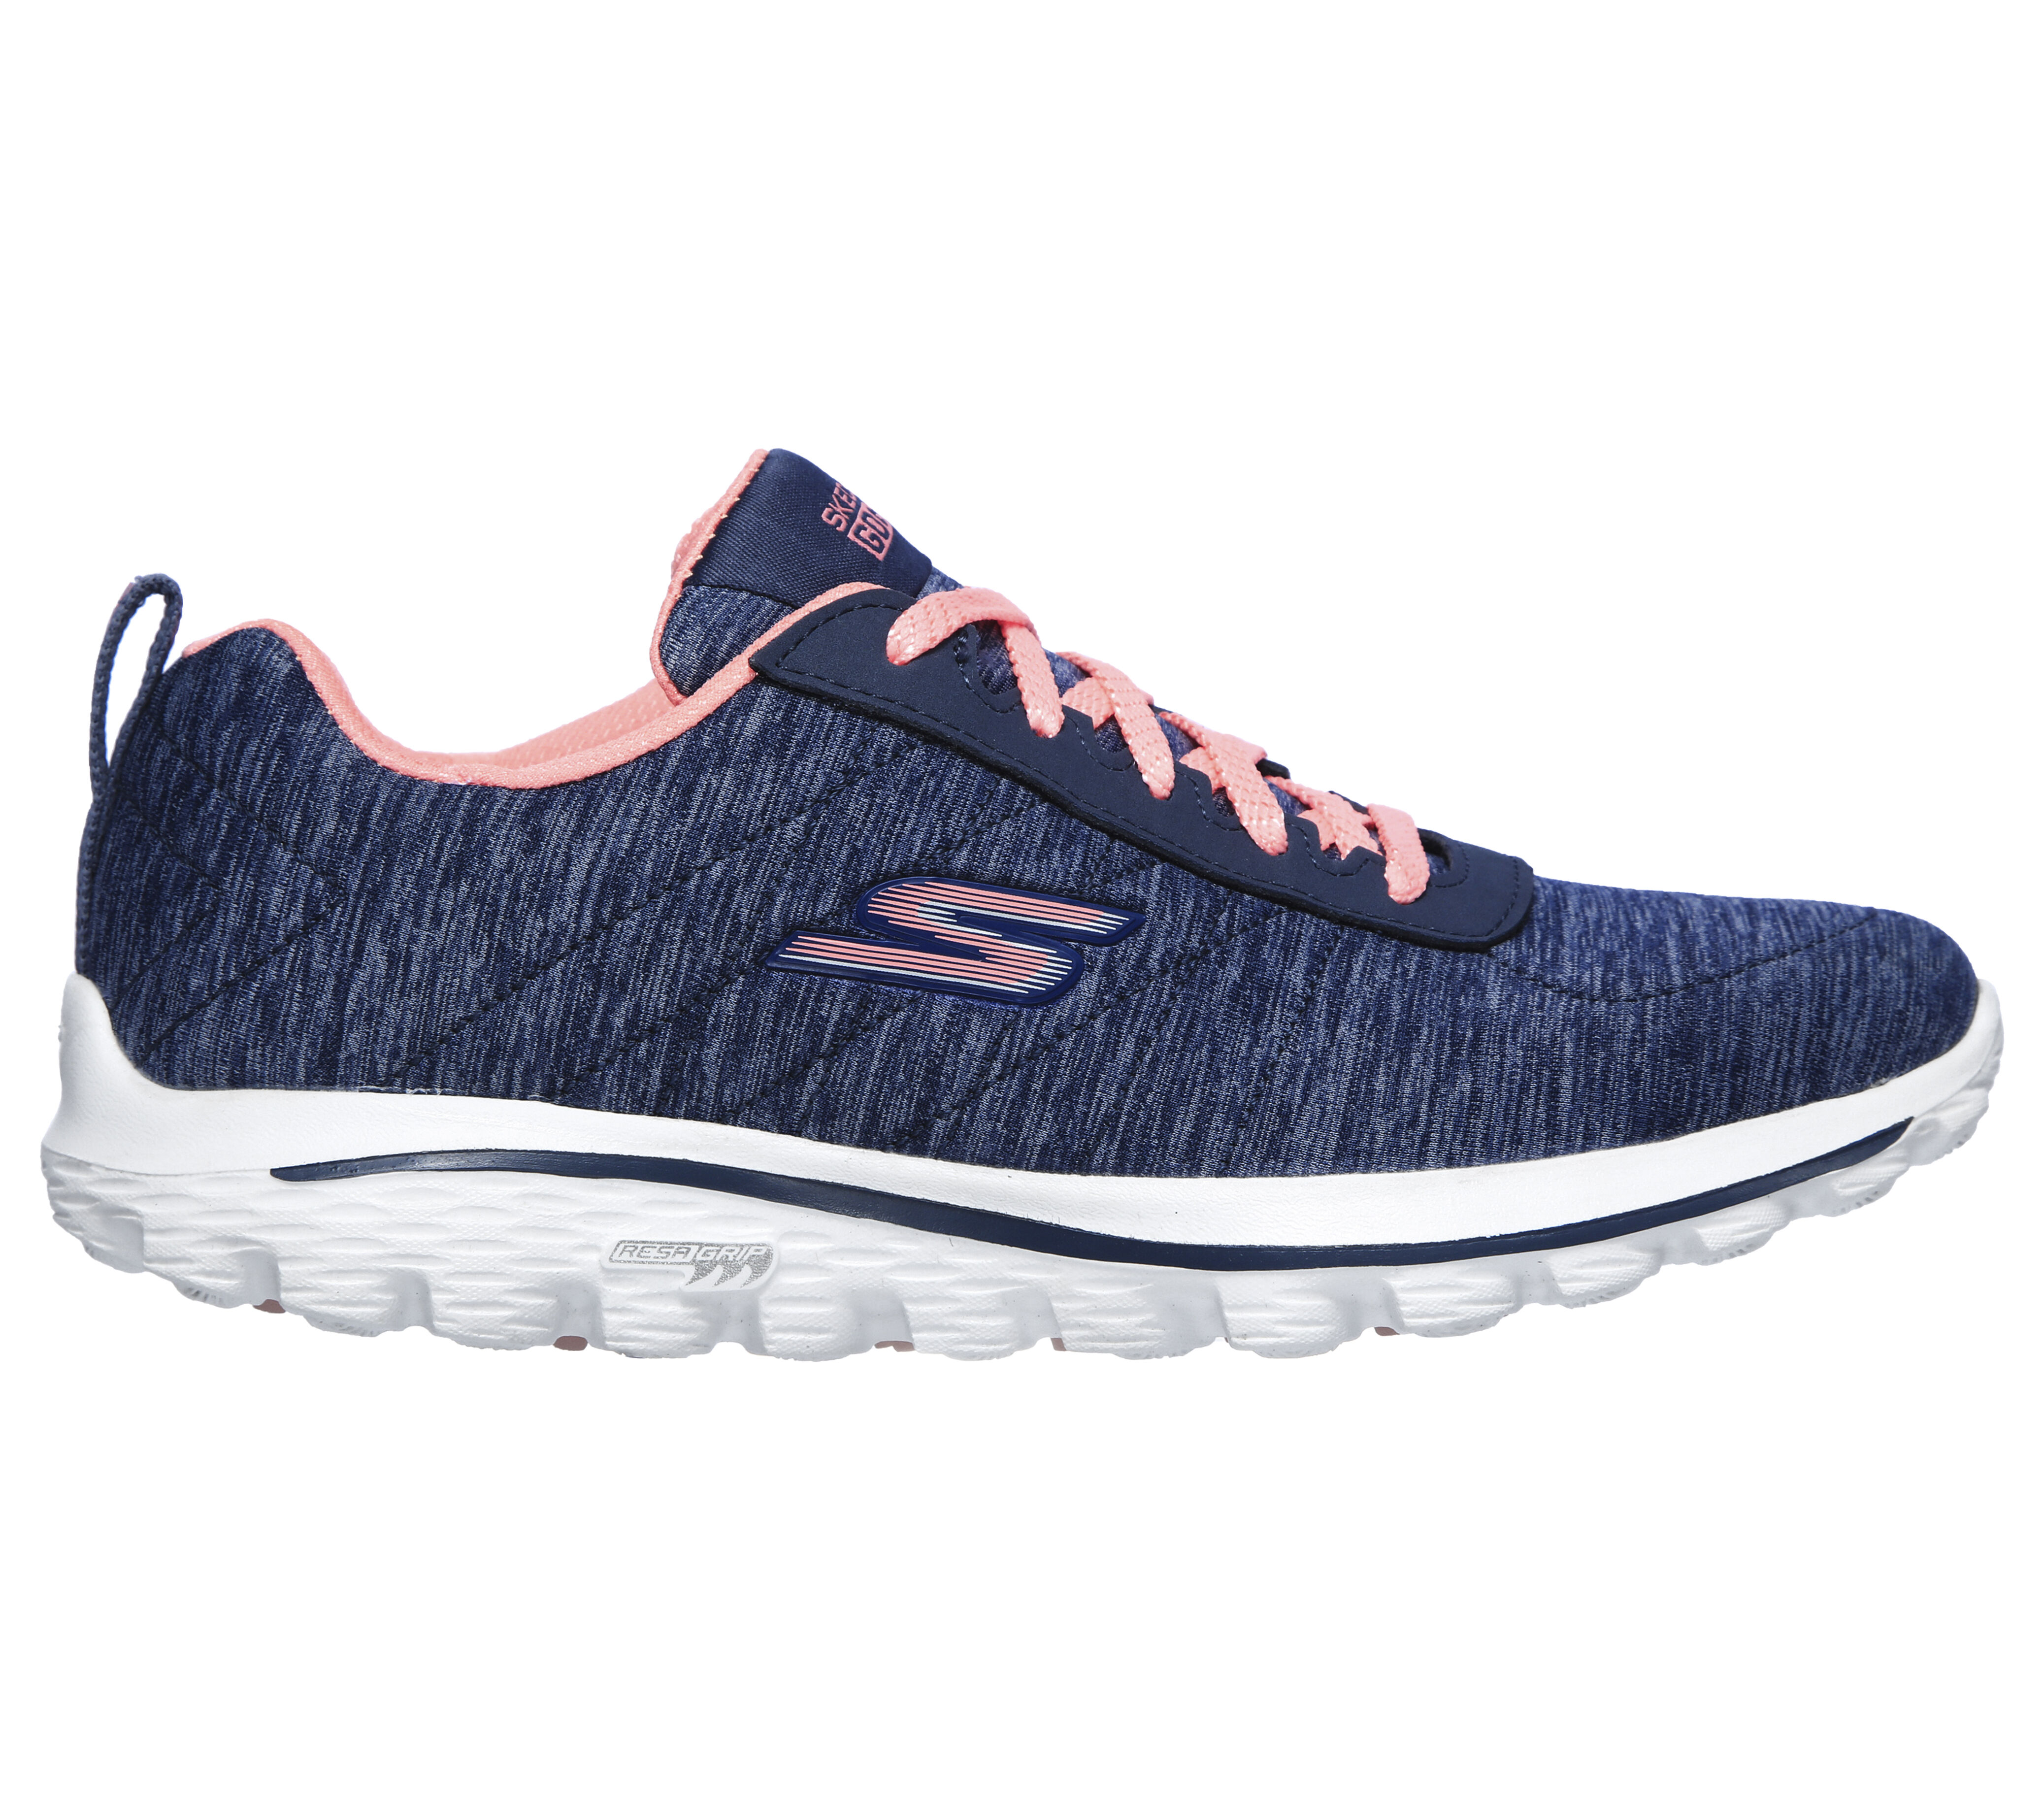 skechers golf shoes wide sizes